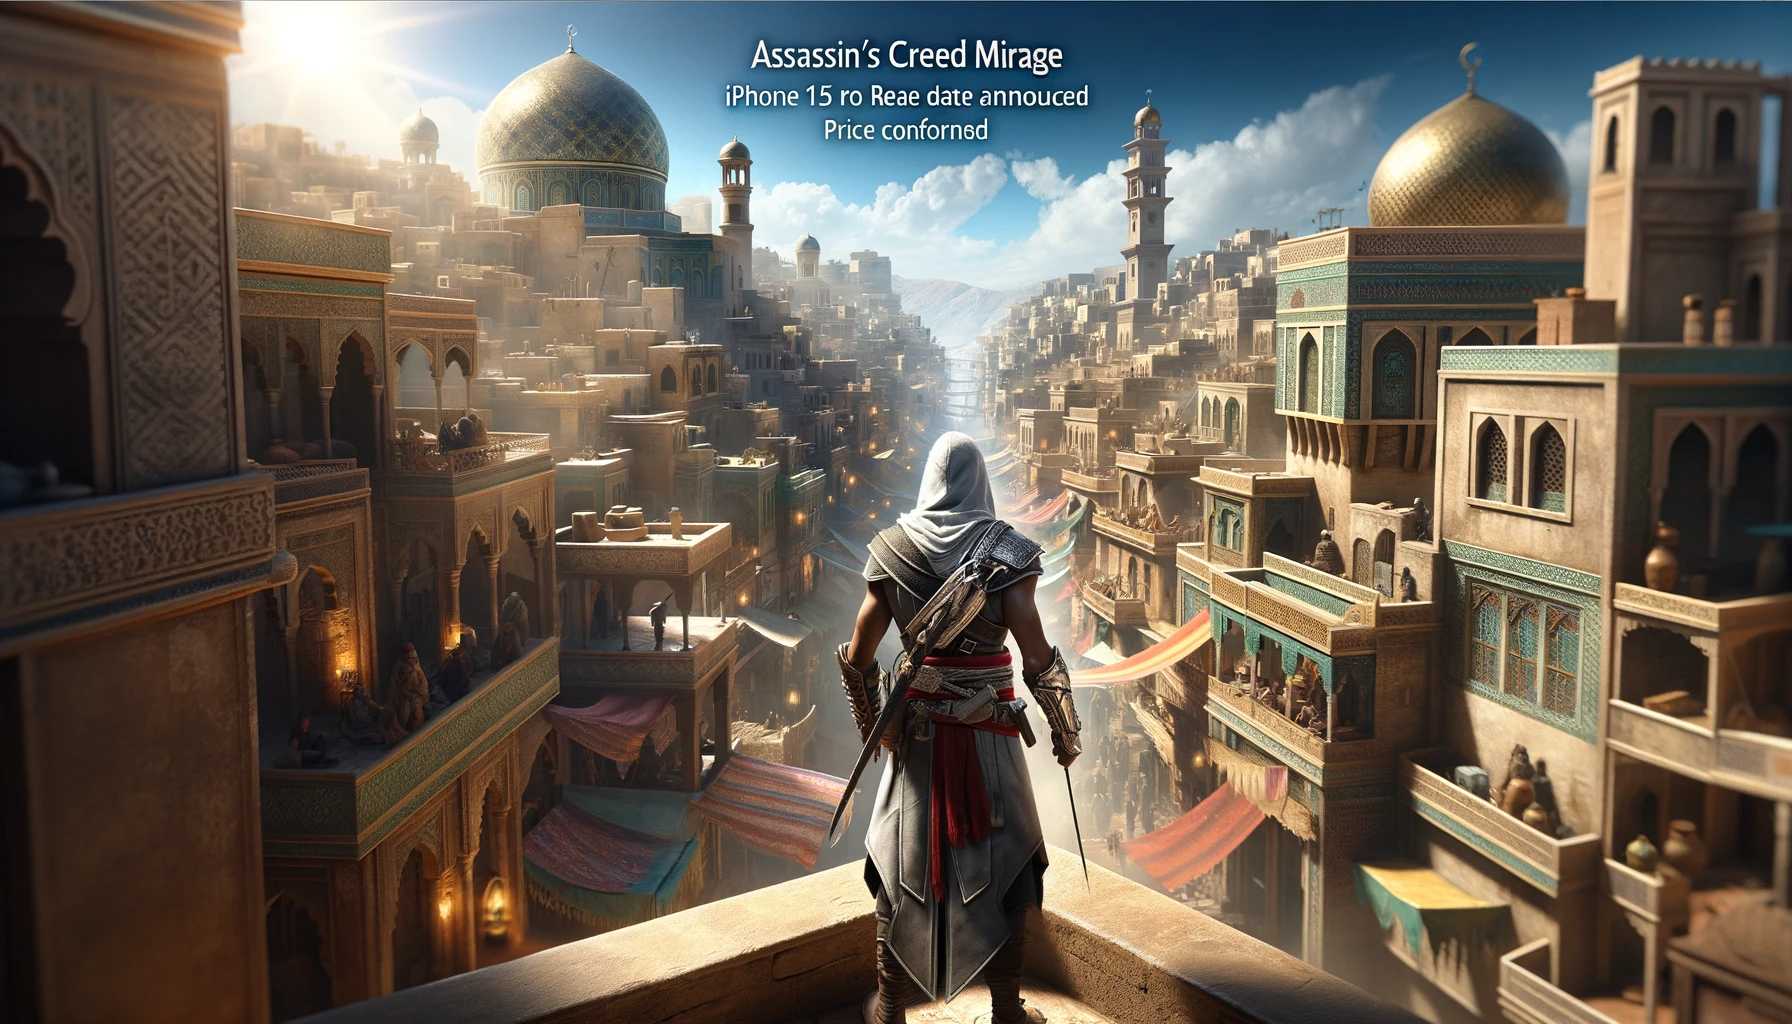 Assassin’s Creed Mirage iPhone 15 Pro and iPad Release Date Announced, Price Confirmed With